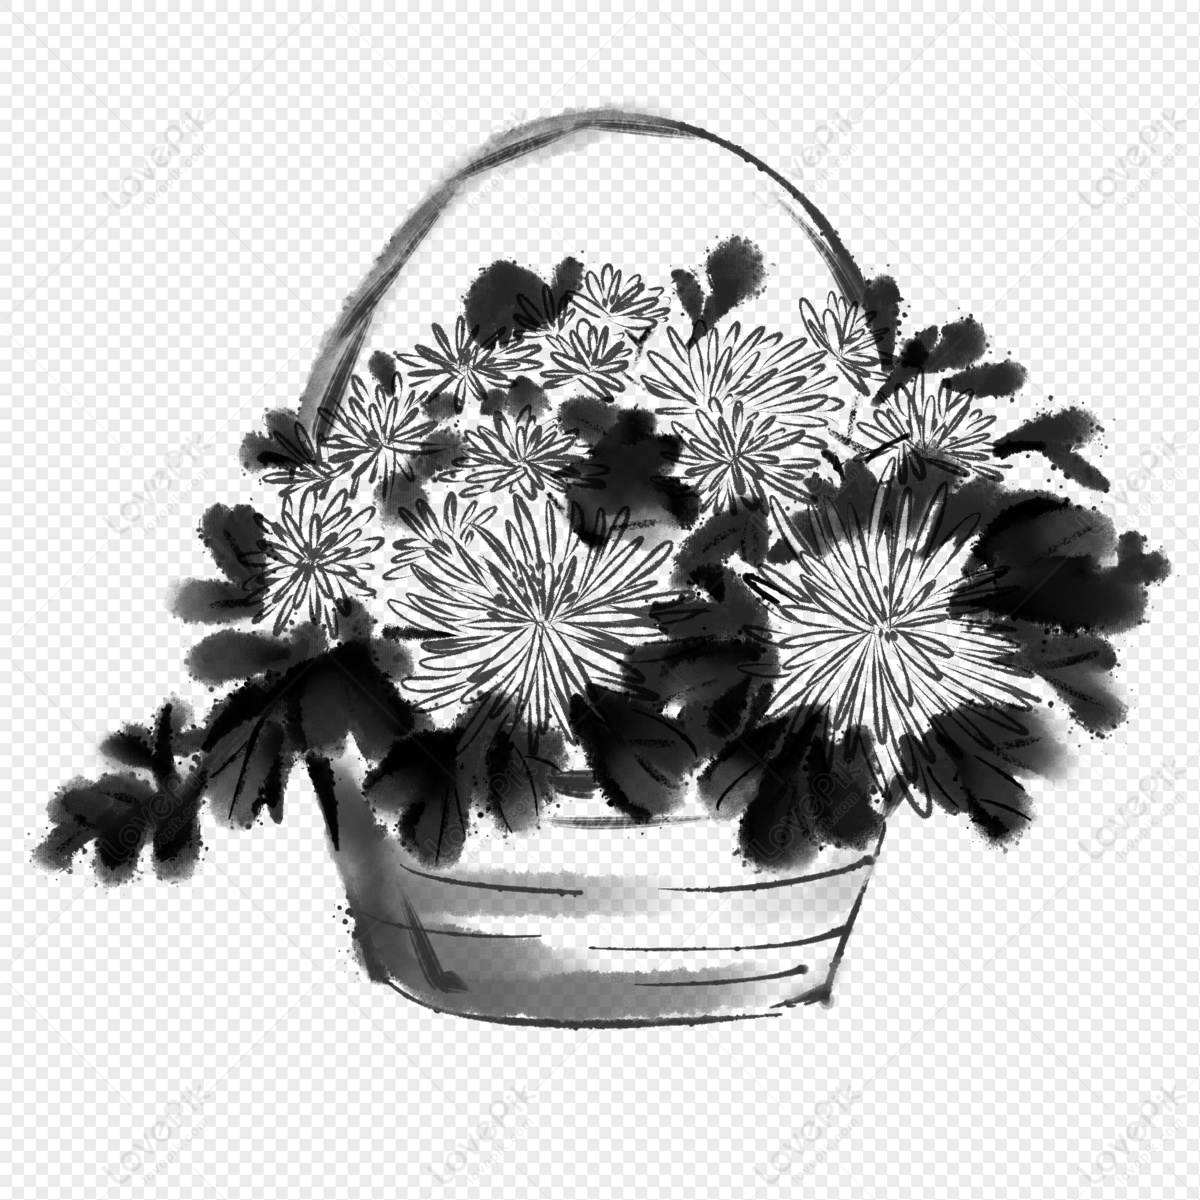 How to Draw Flower's Basket | step by spet sketch tutorial - YouTube